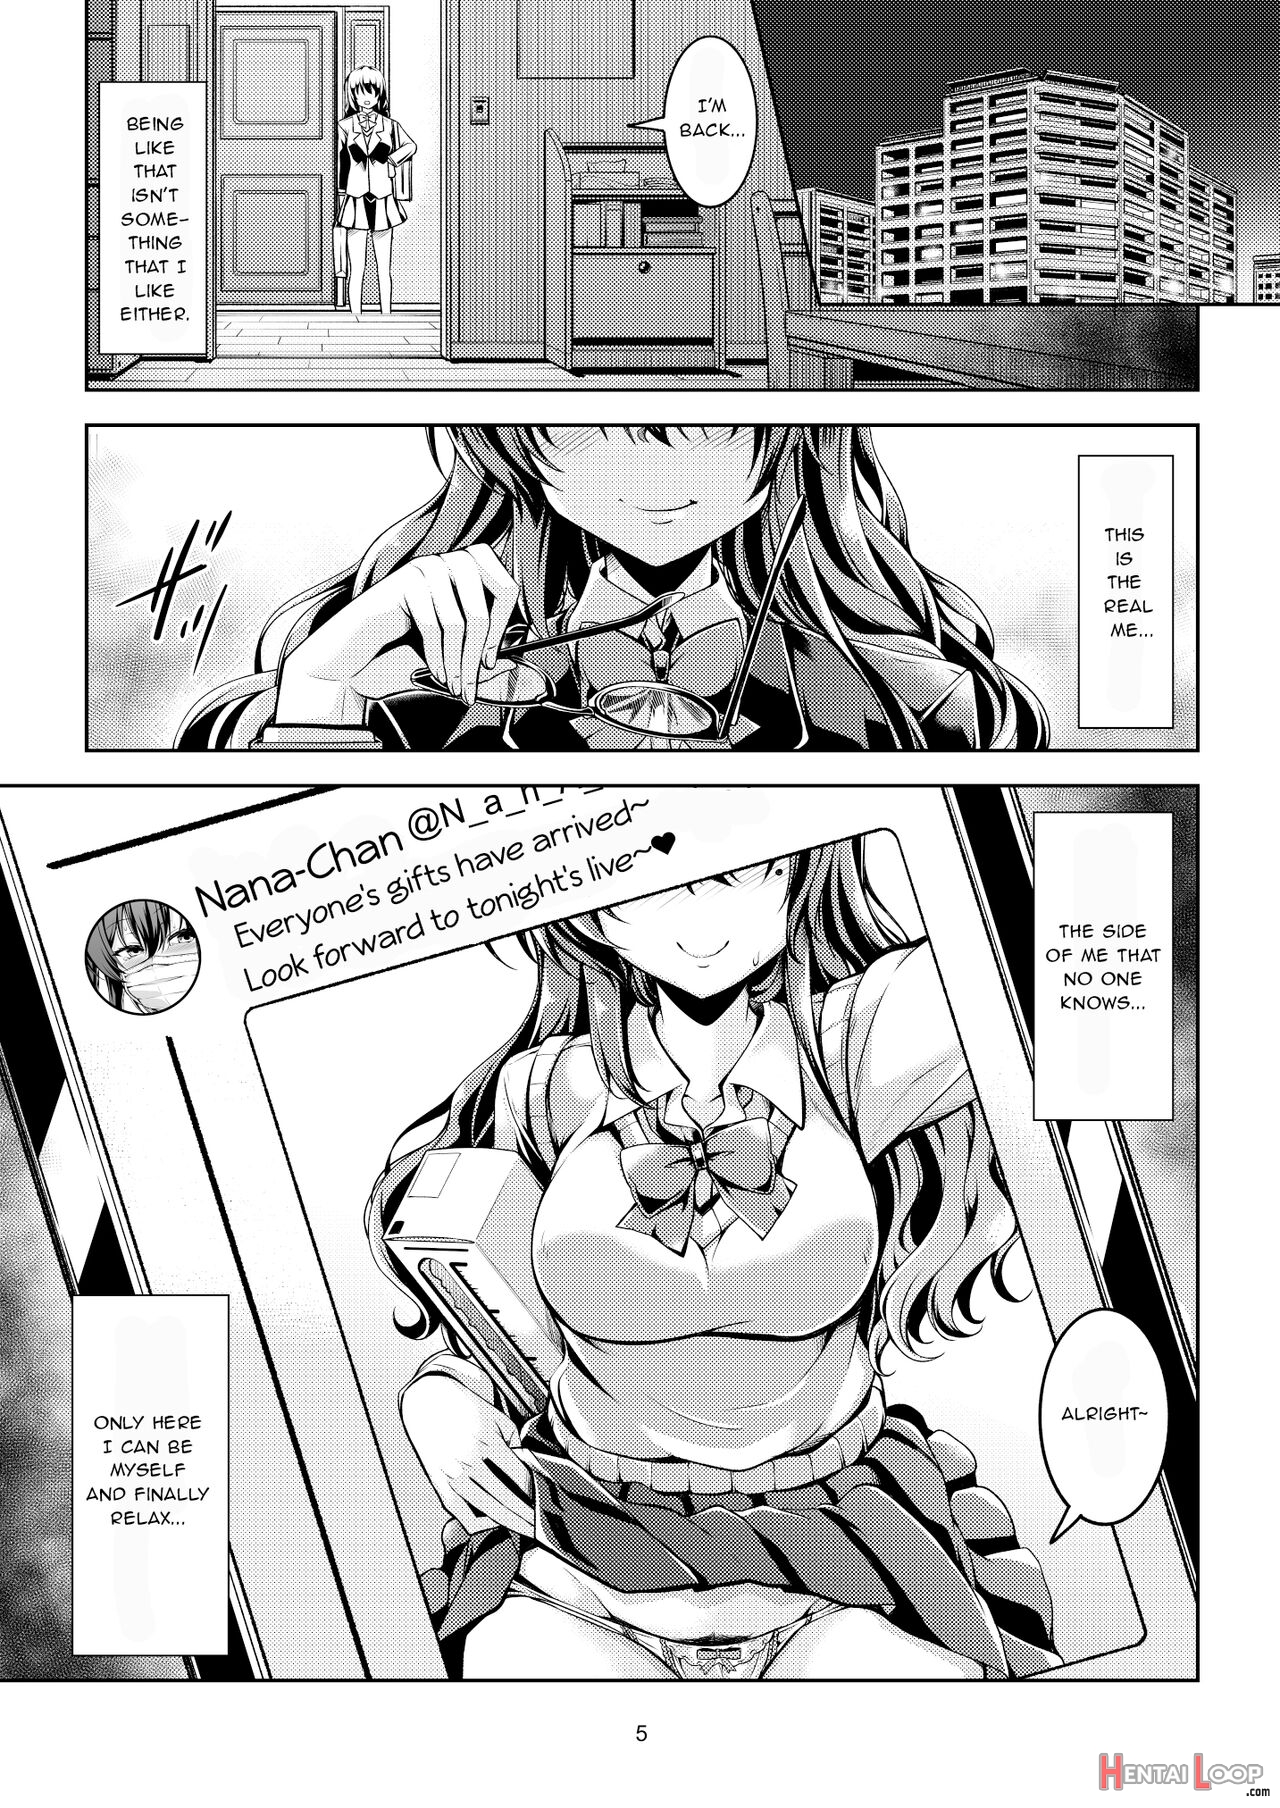 Darkside Streamer Take 1 Blackmail! The Fall Of The Anal Maniac Student Council President -yukino Kanami- page 9